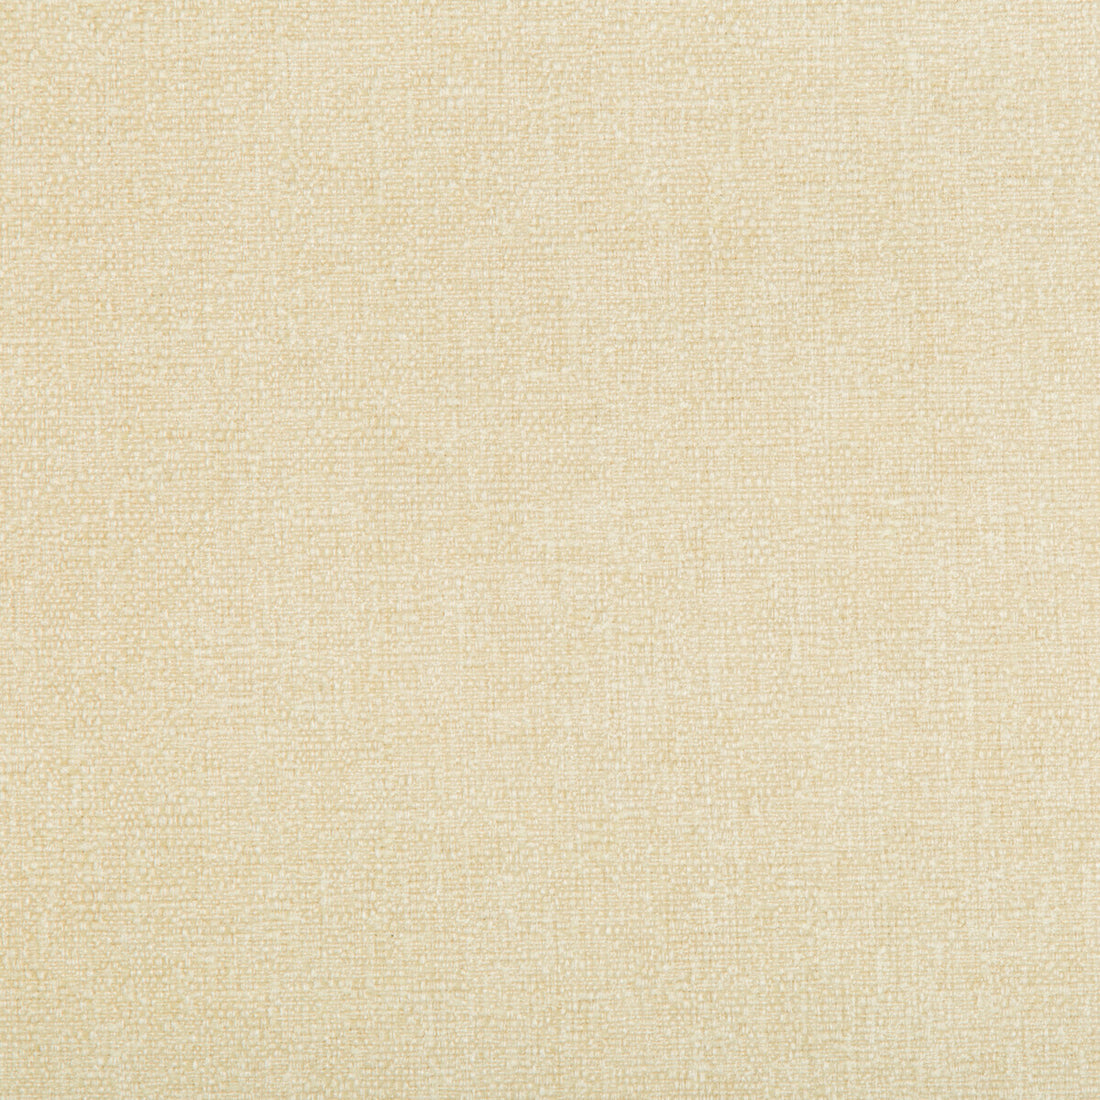 Kravet Smart fabric in 35391-116 color - pattern 35391.116.0 - by Kravet Smart in the Performance Crypton Home collection